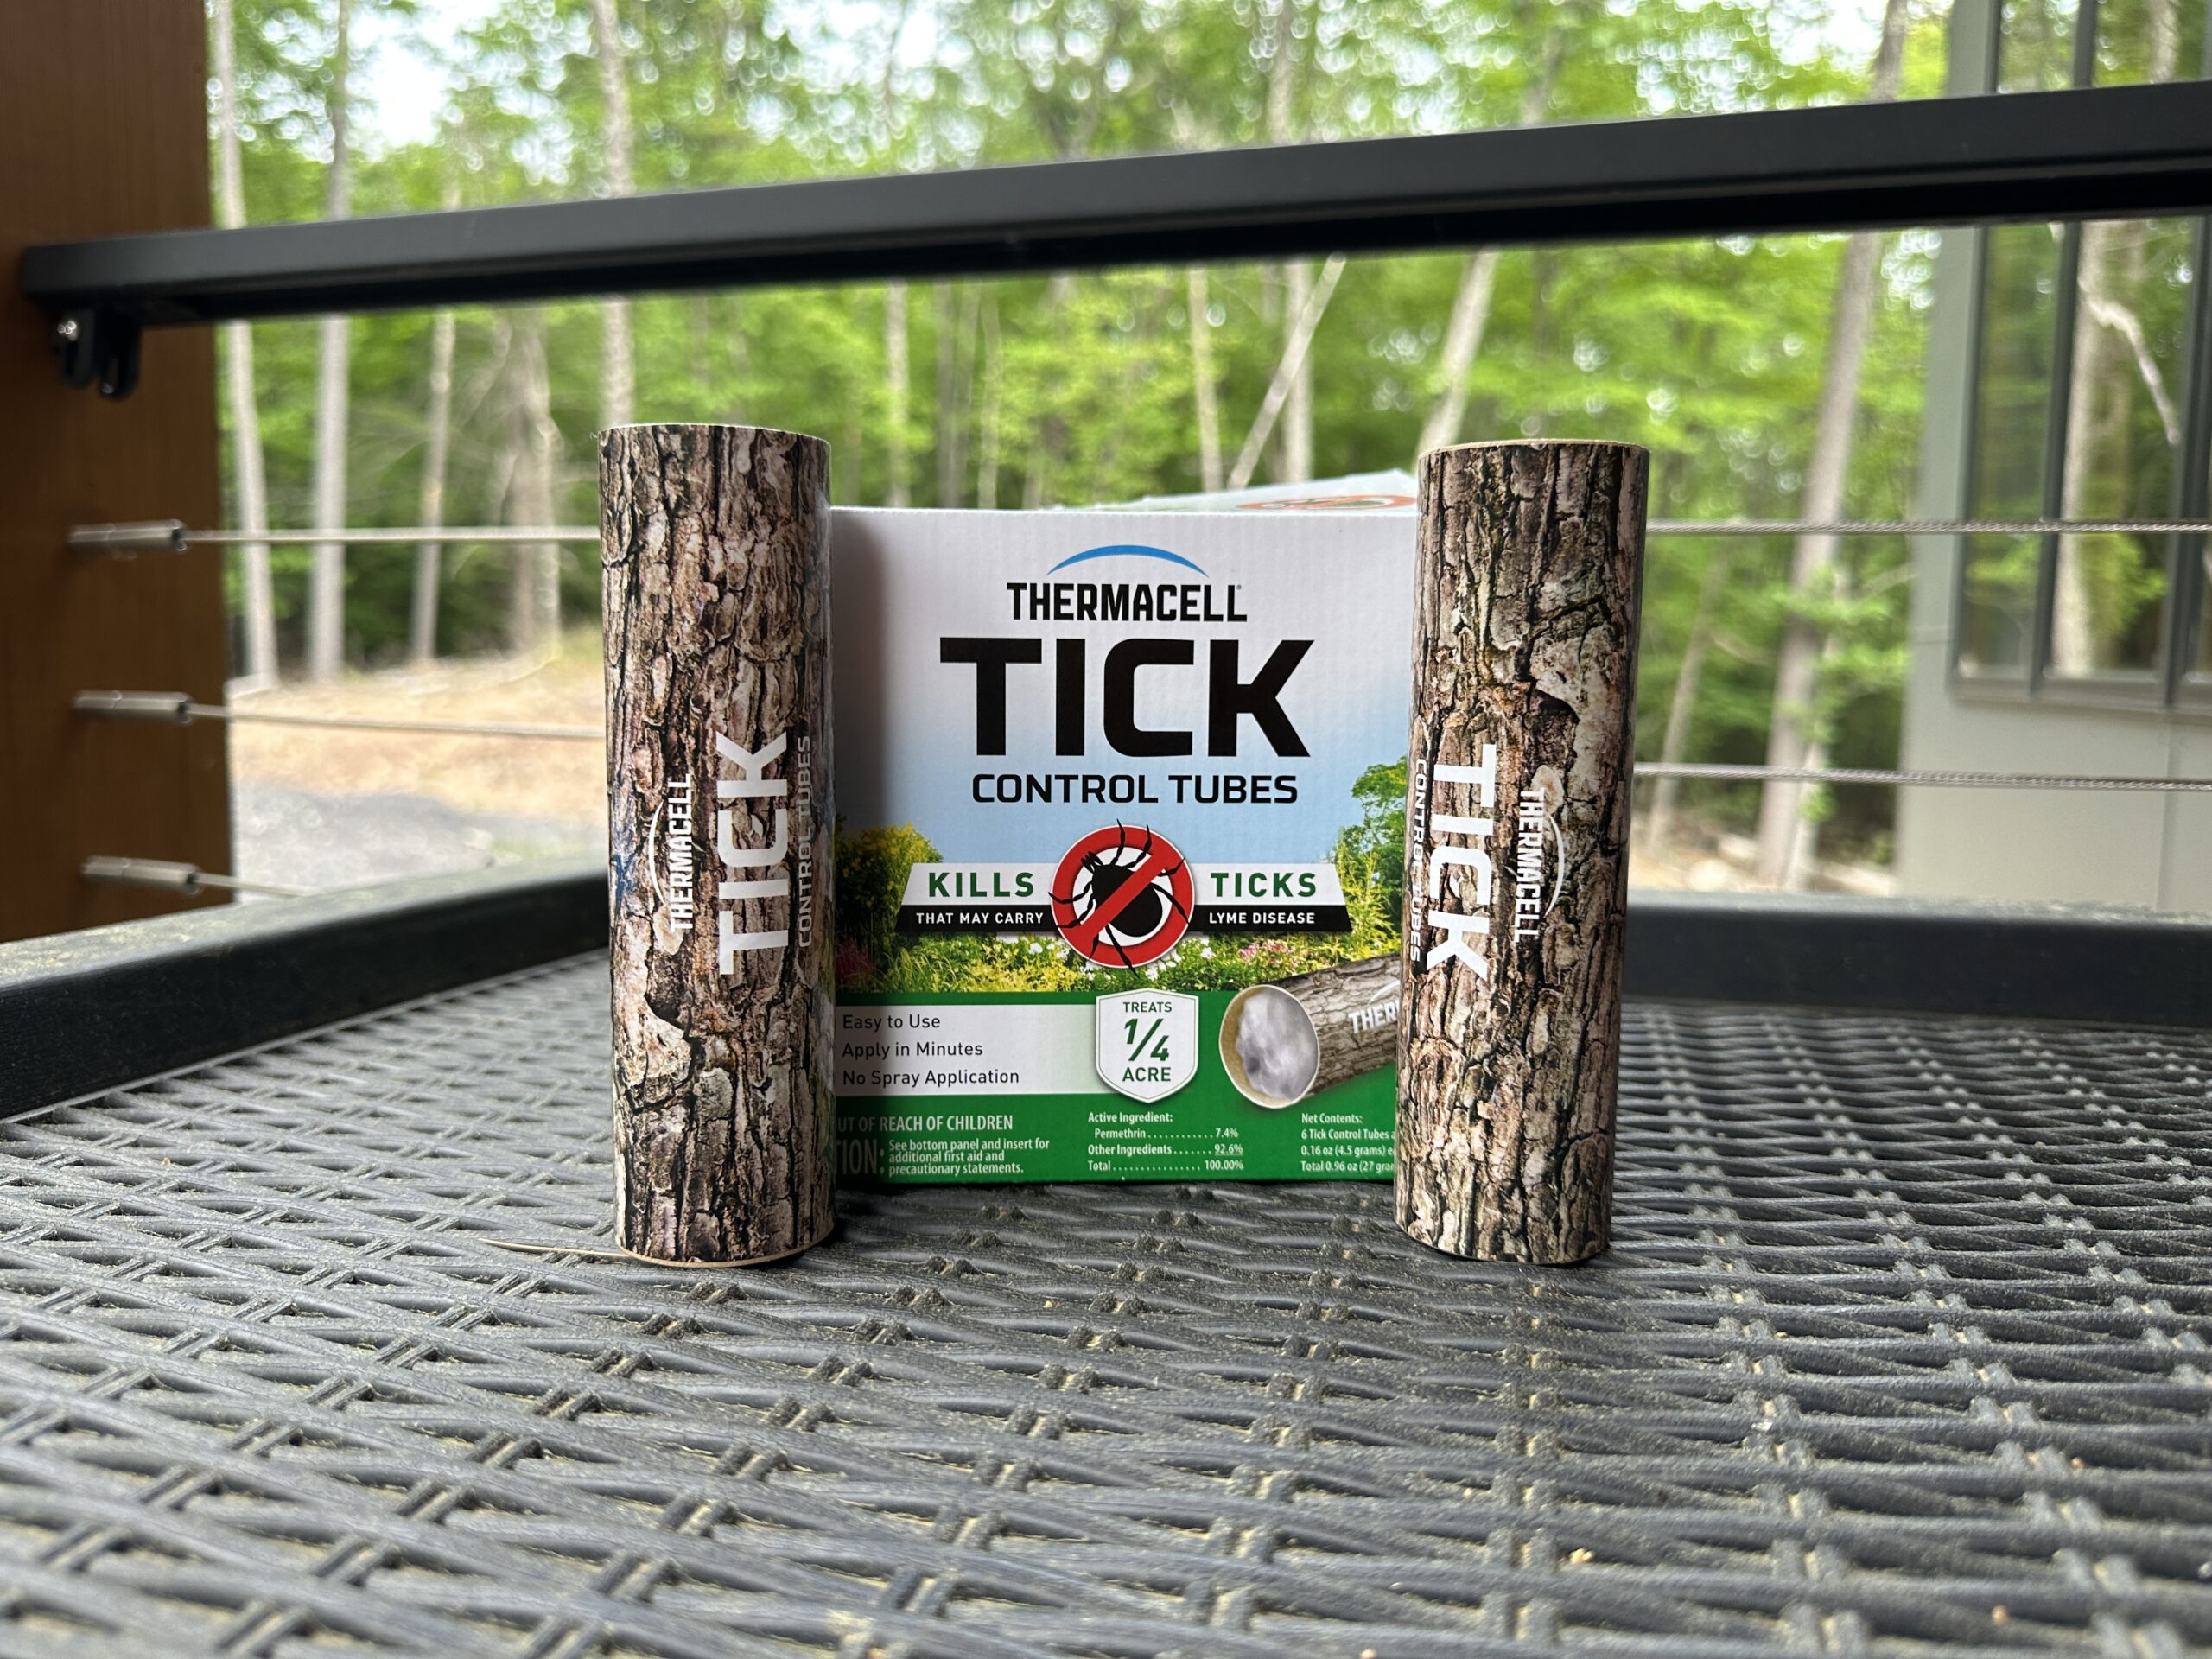 Thermacall makes the best insect repellent for ticks.